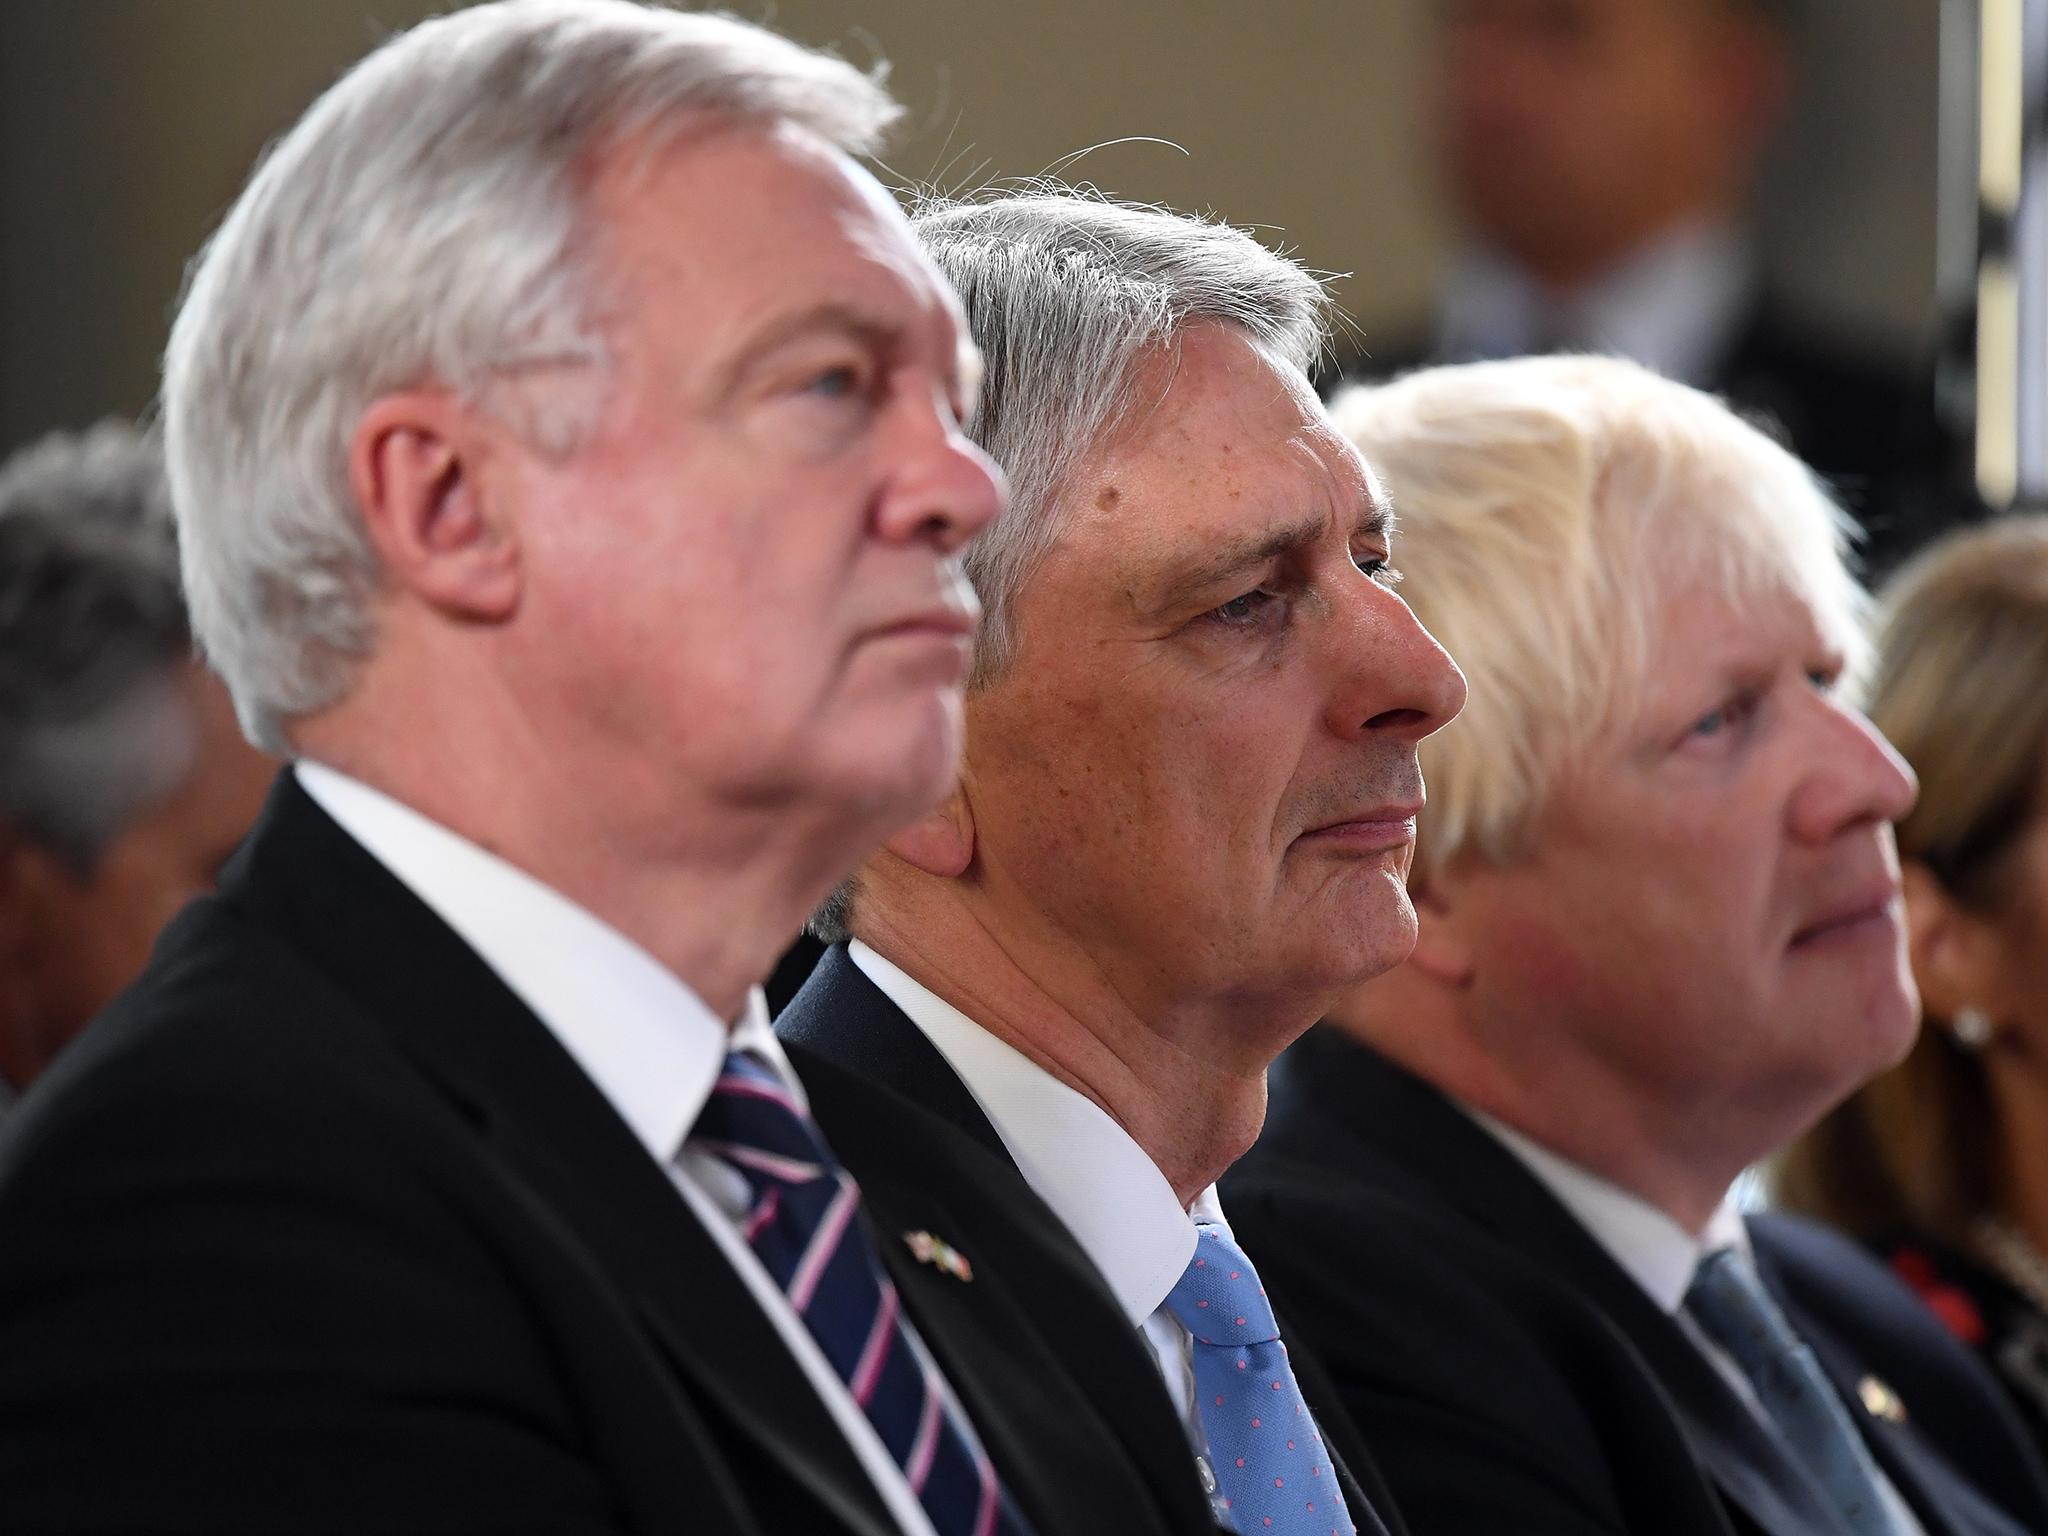 David Davis, Chancellor Hammond and Foreign Secretary Boris Johnson are said to have been involved in the plan against Ms May